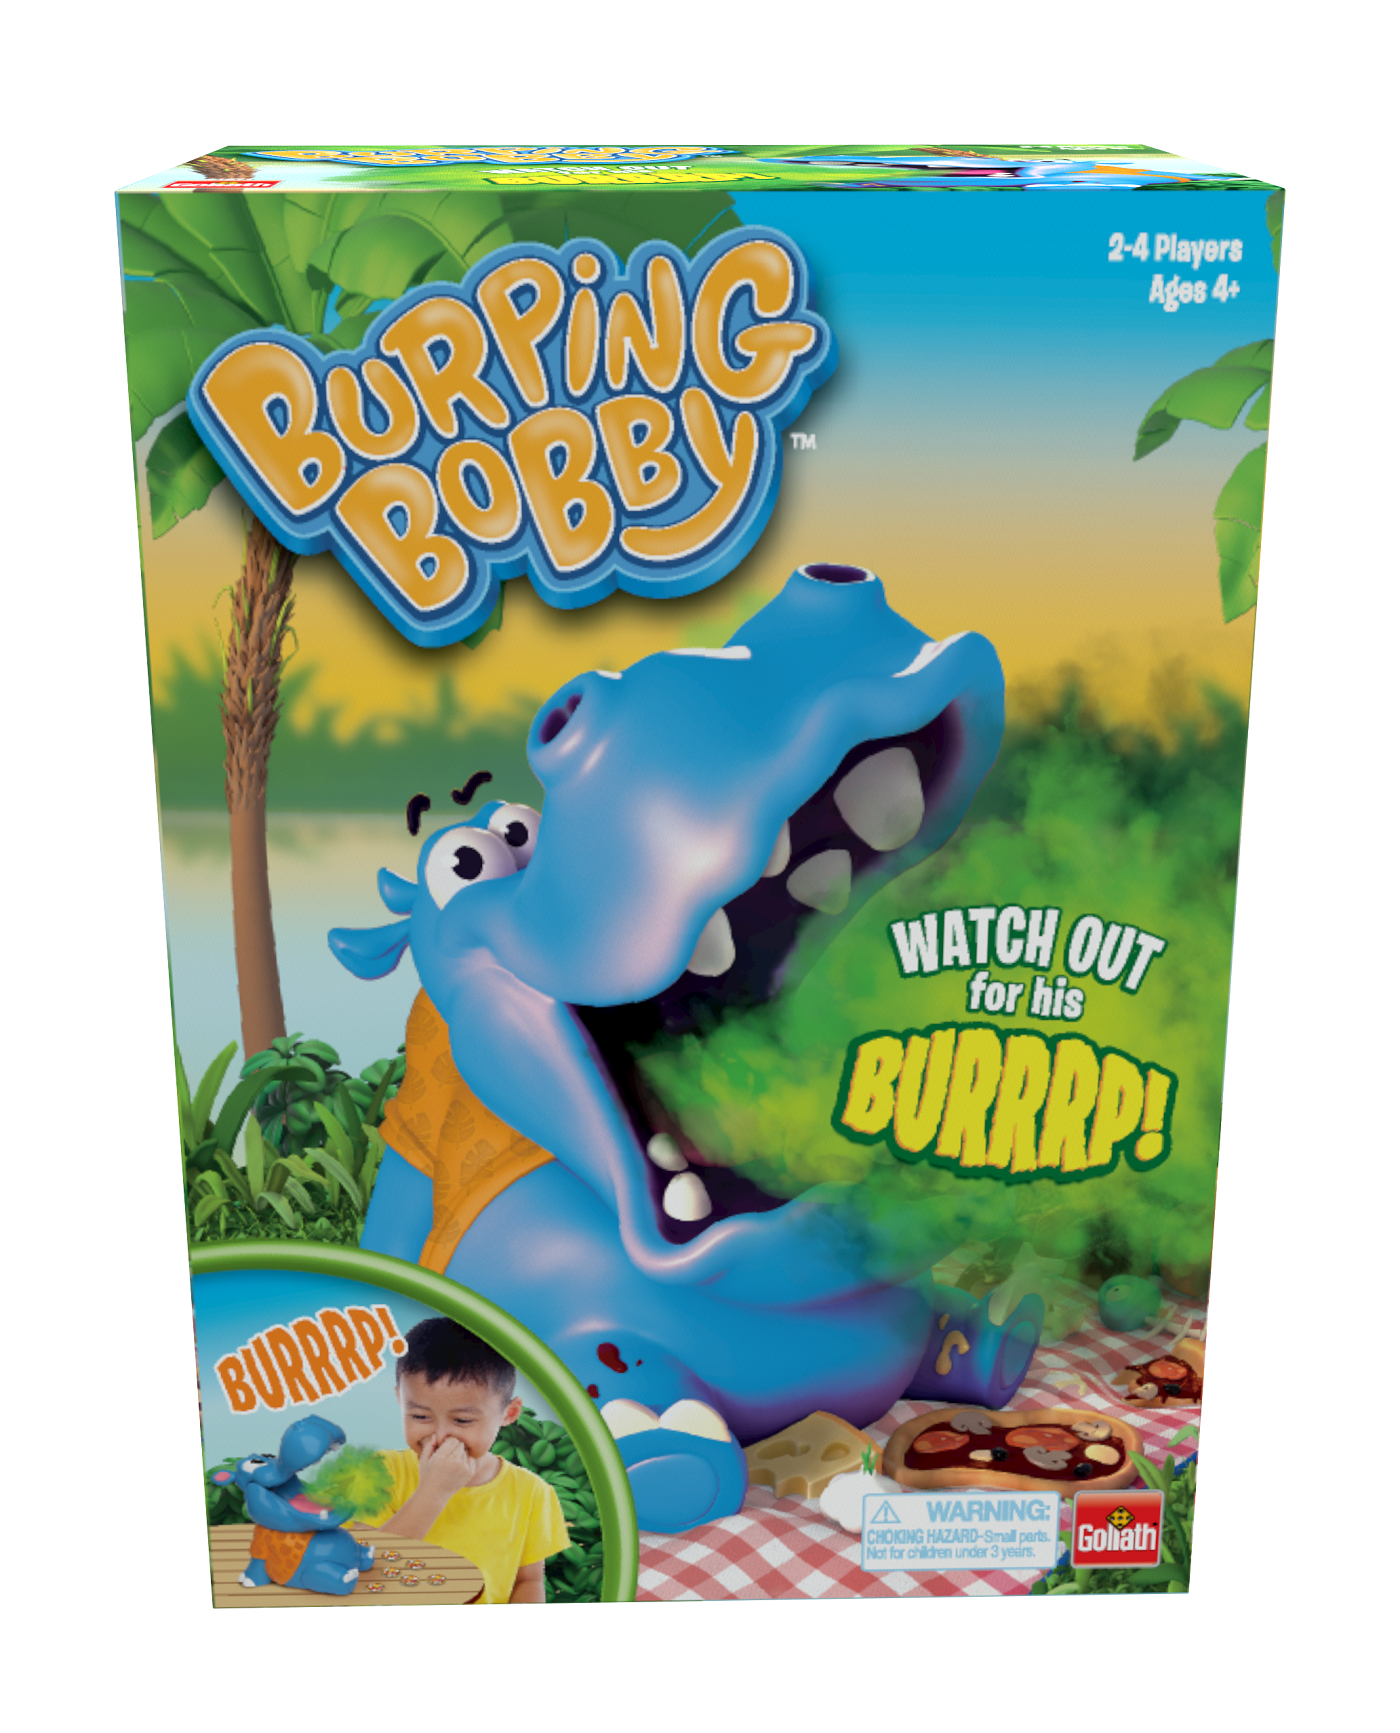 Burp the Baby Hilarious Children’s Game from TOMY for 2 to 4 players age 4 plus 